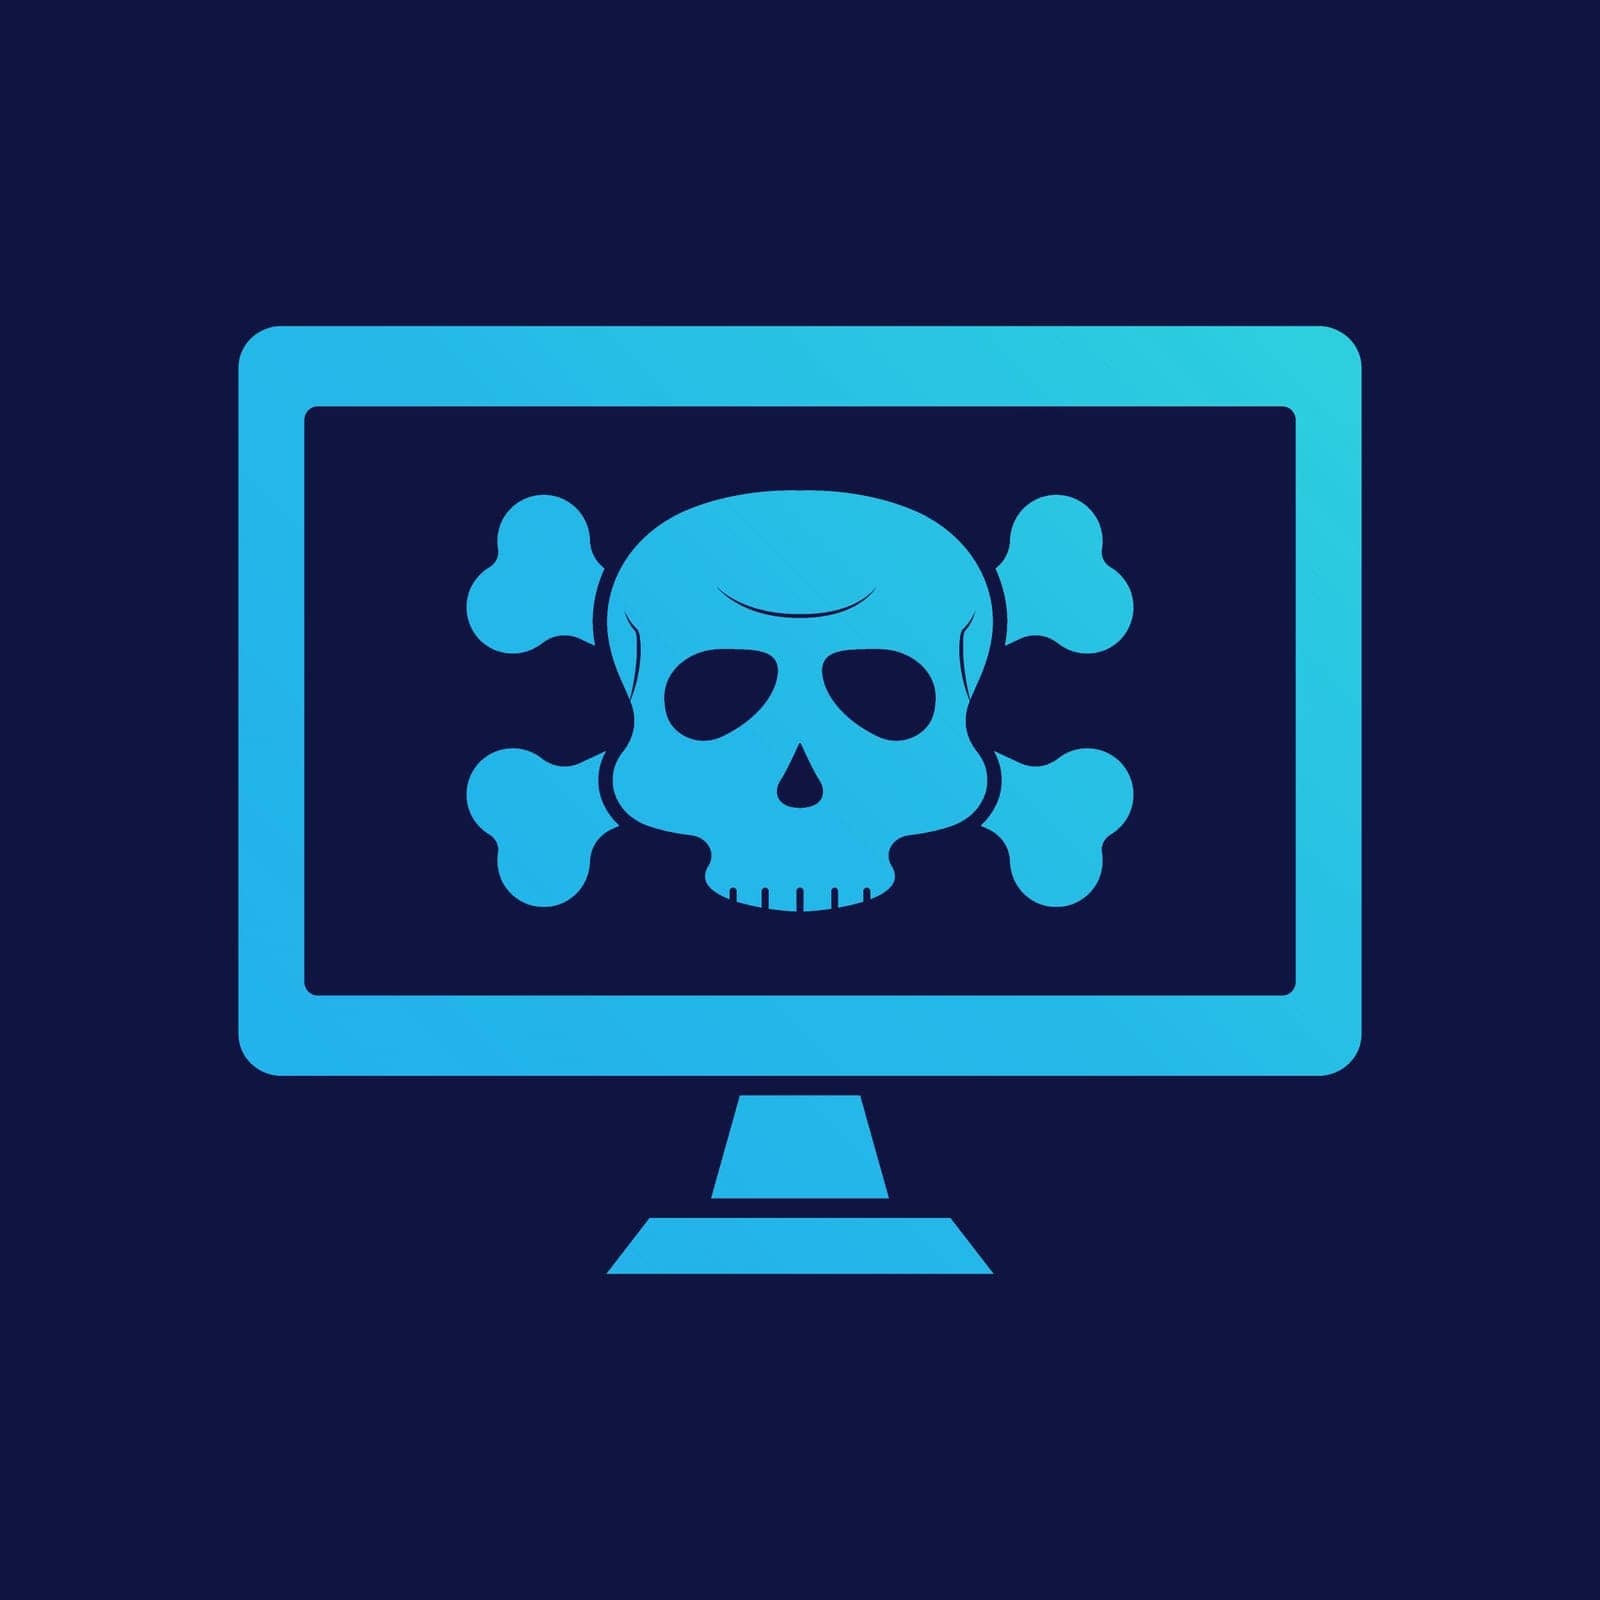 Virus Alert Icon. Computer with Virus. Cyber Attack Alert Icon with Skull. Phishing Scam concept. Hacker Attack, Phishing and Fraud. Vector illustration.